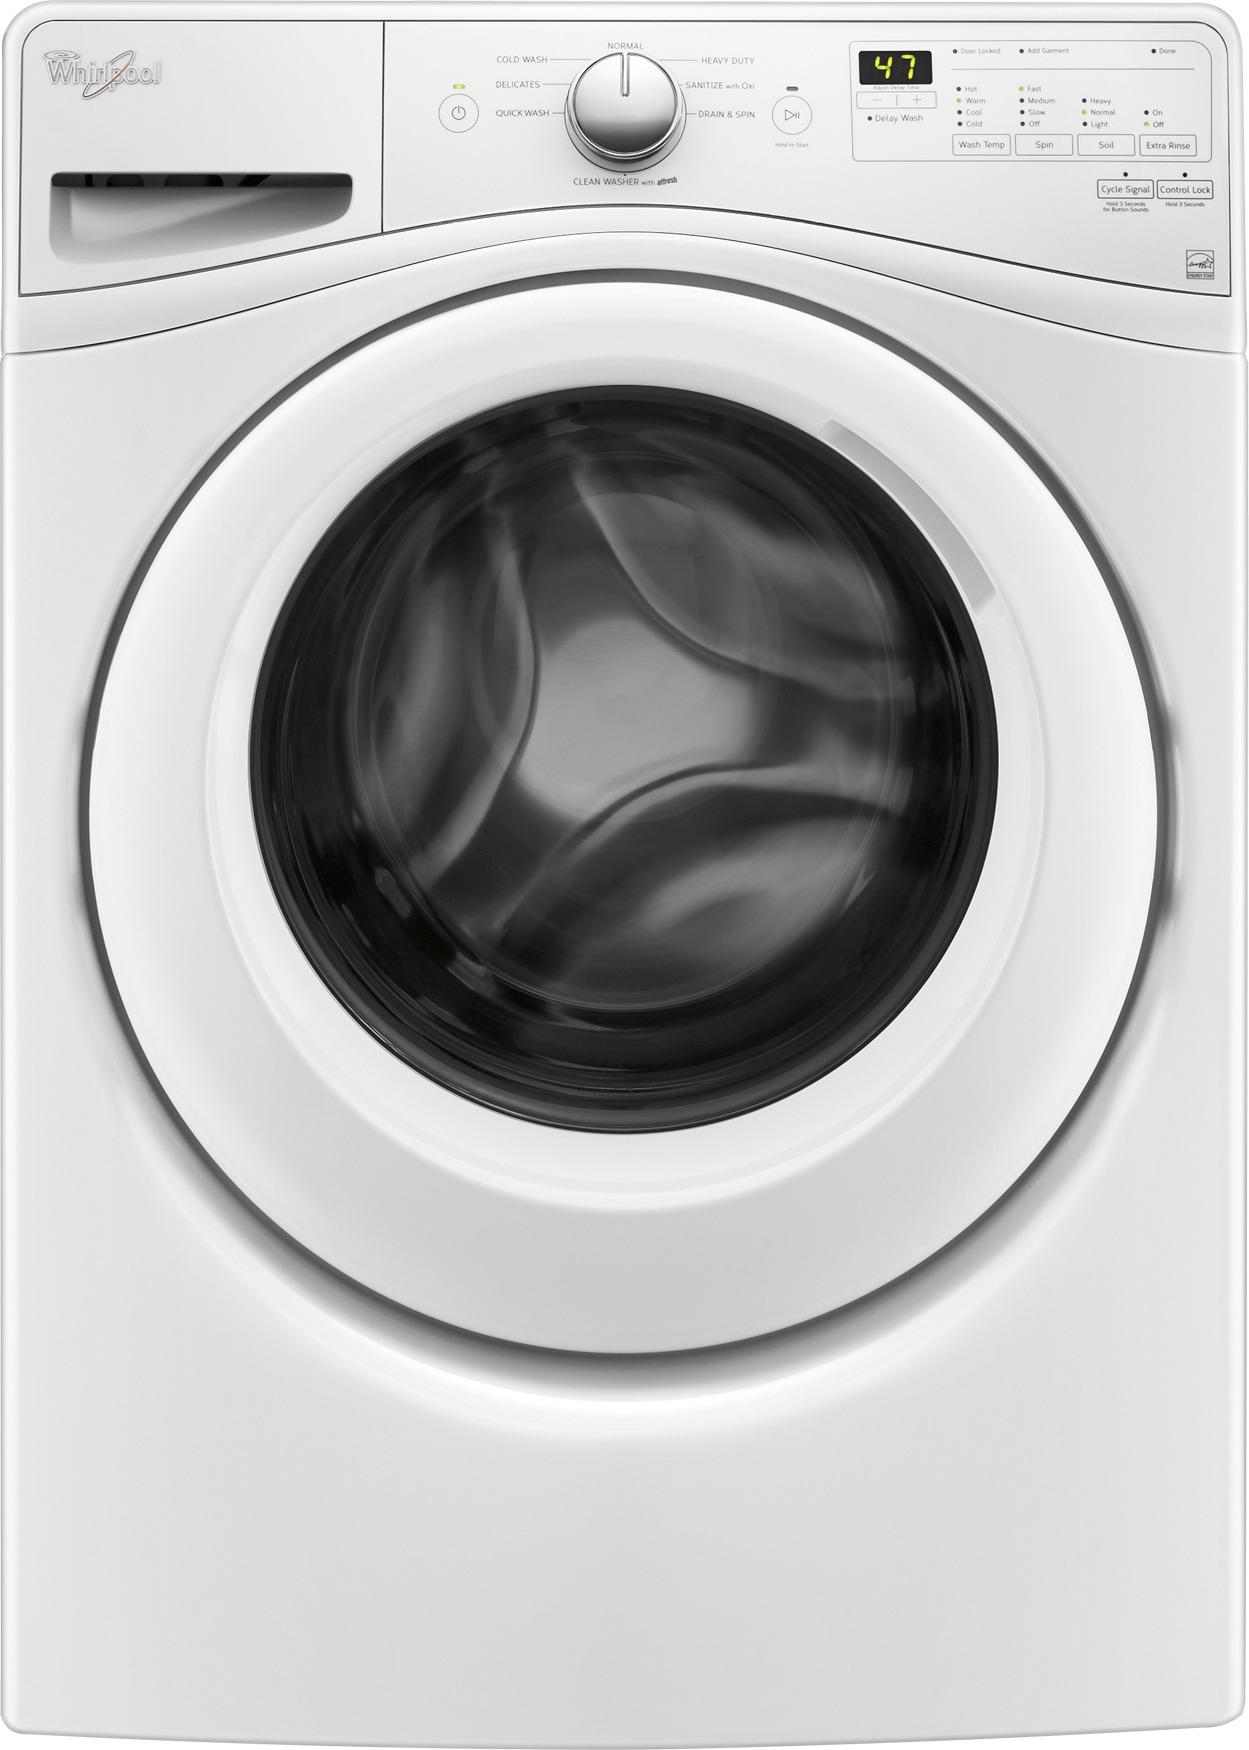 Best Buy Whirlpool 4 5 Cu Ft 8 Cycle High Efficiency Front Load Washer White Wfw75hefw,Purple Finch Female